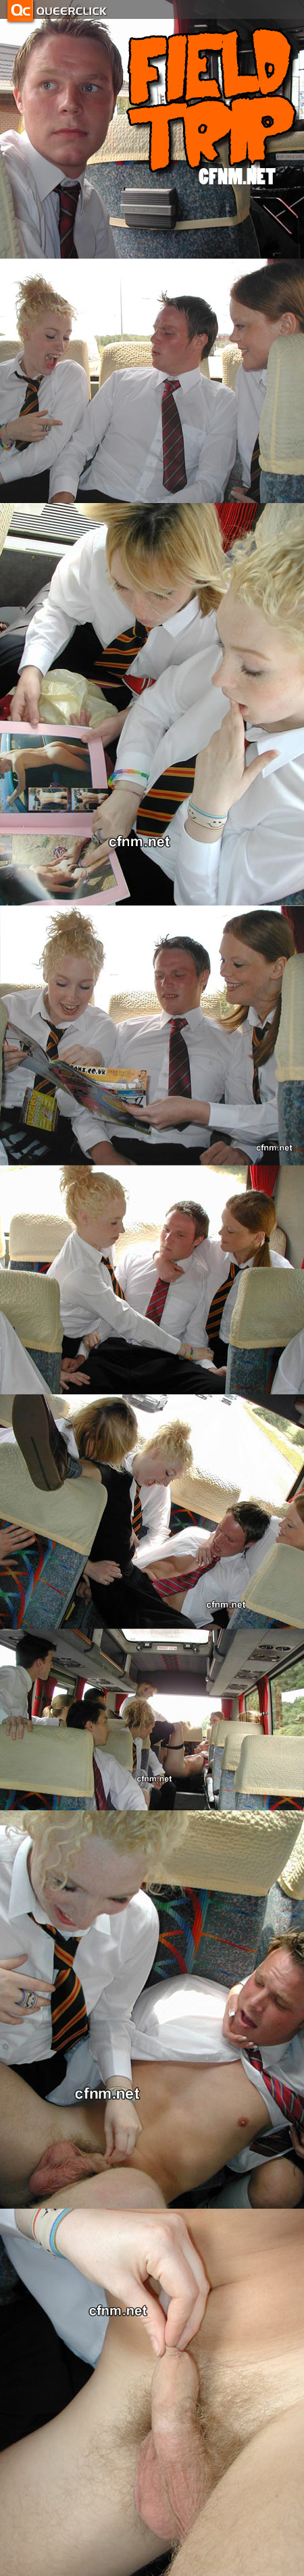 Field Trip ends up with a naked lad in the back of the bus!